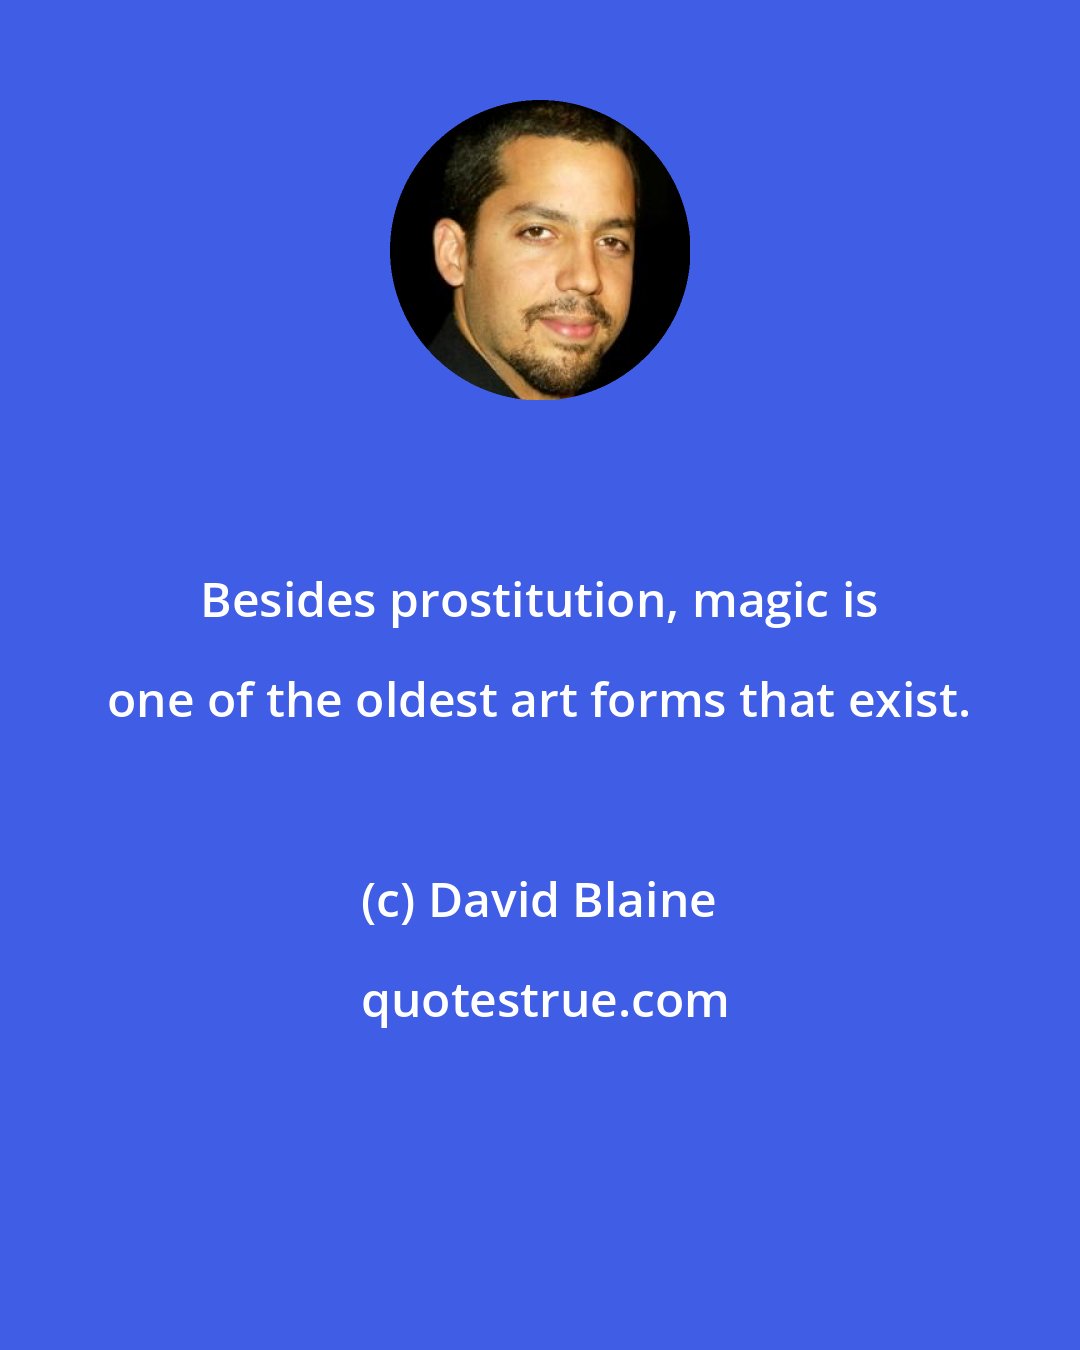 David Blaine: Besides prostitution, magic is one of the oldest art forms that exist.